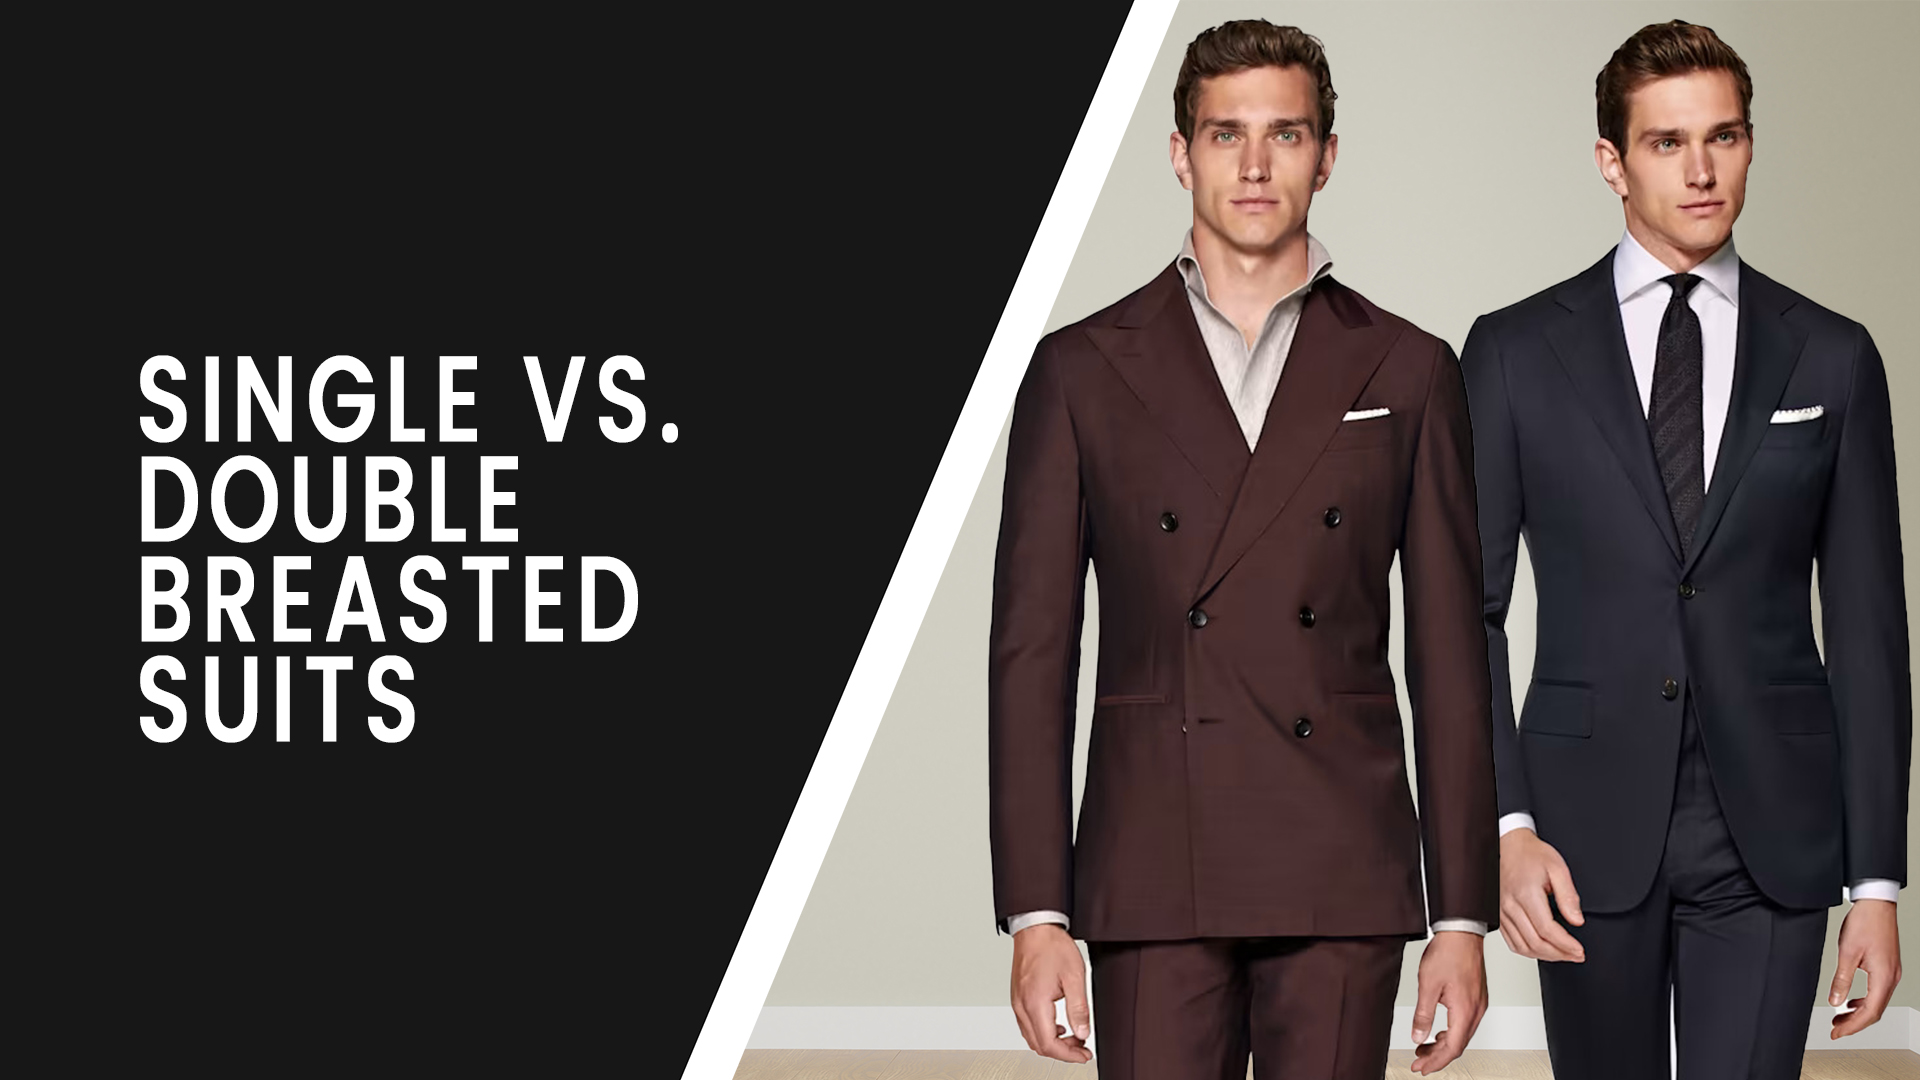 Single-breasted vs. double-breasted suits cover